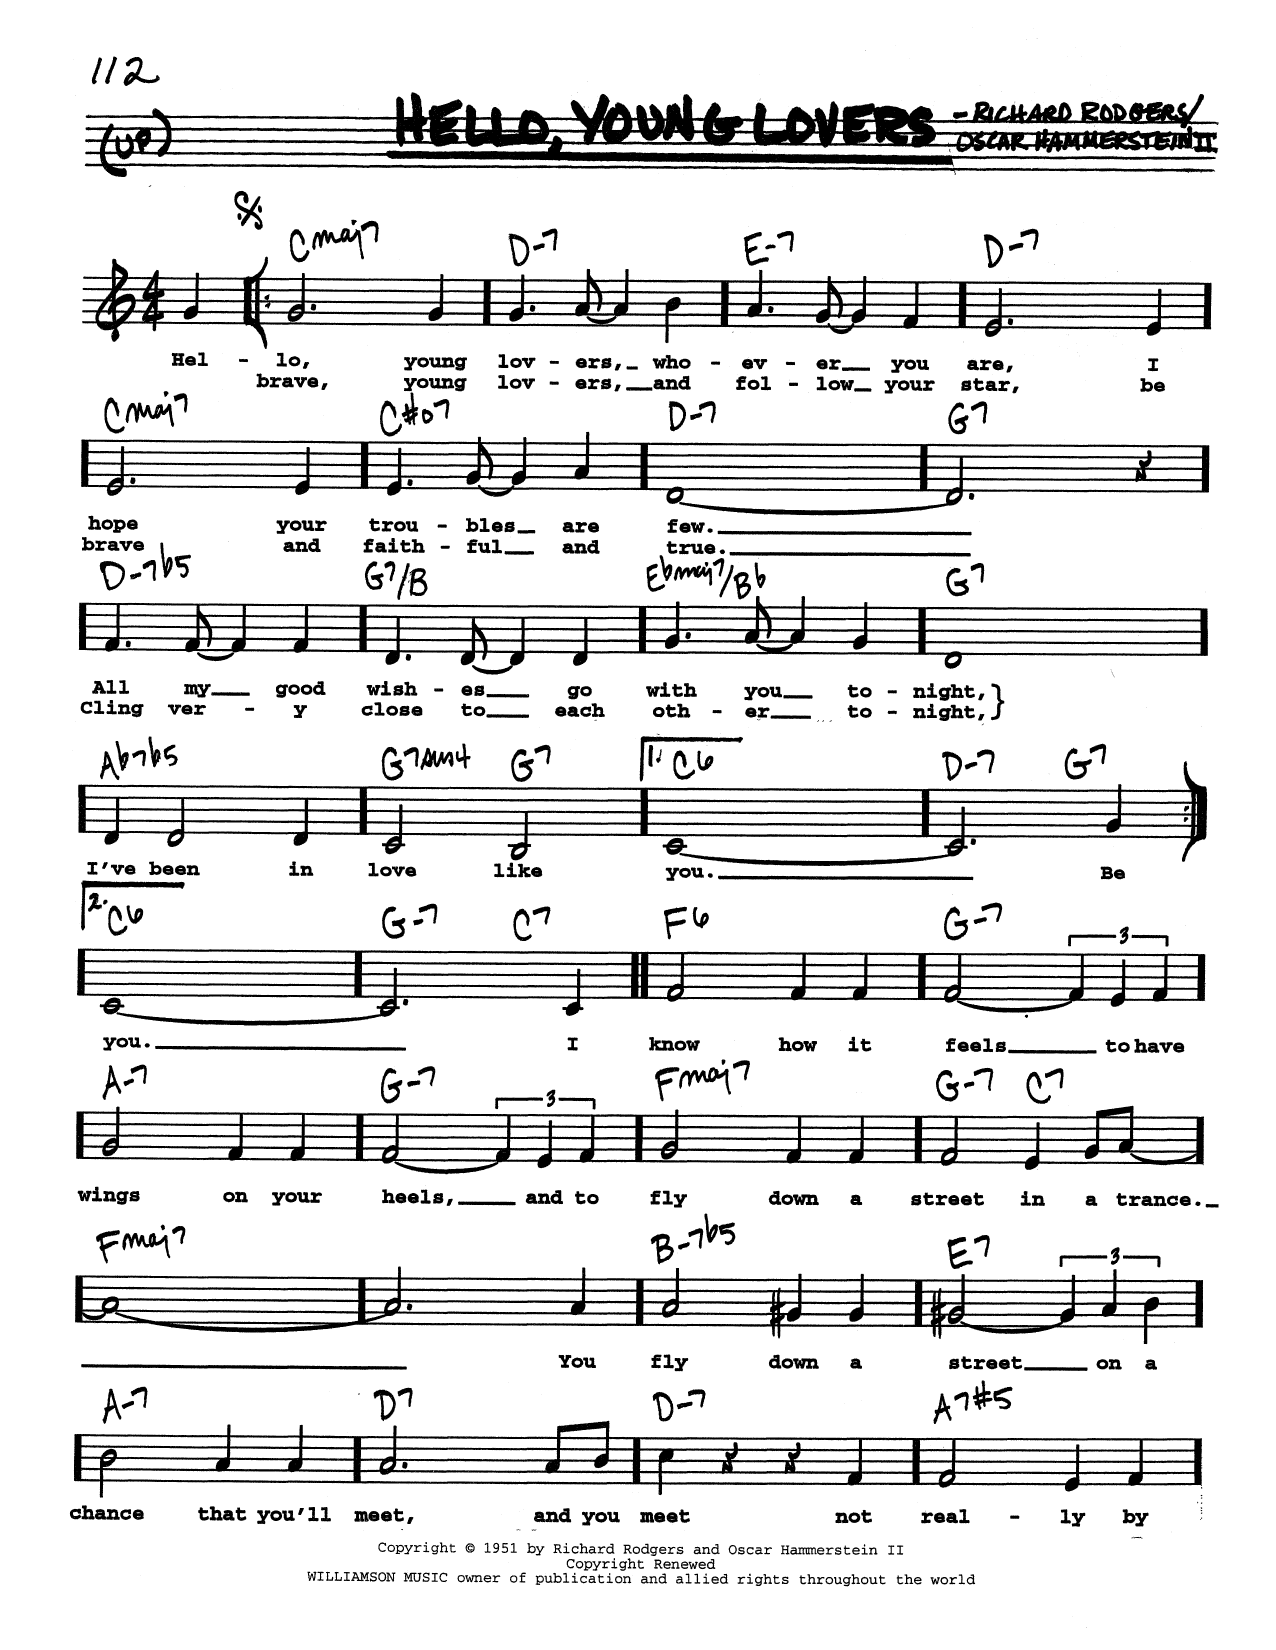 Rodgers & Hammerstein Hello, Young Lovers (Low Voice) sheet music notes printable PDF score